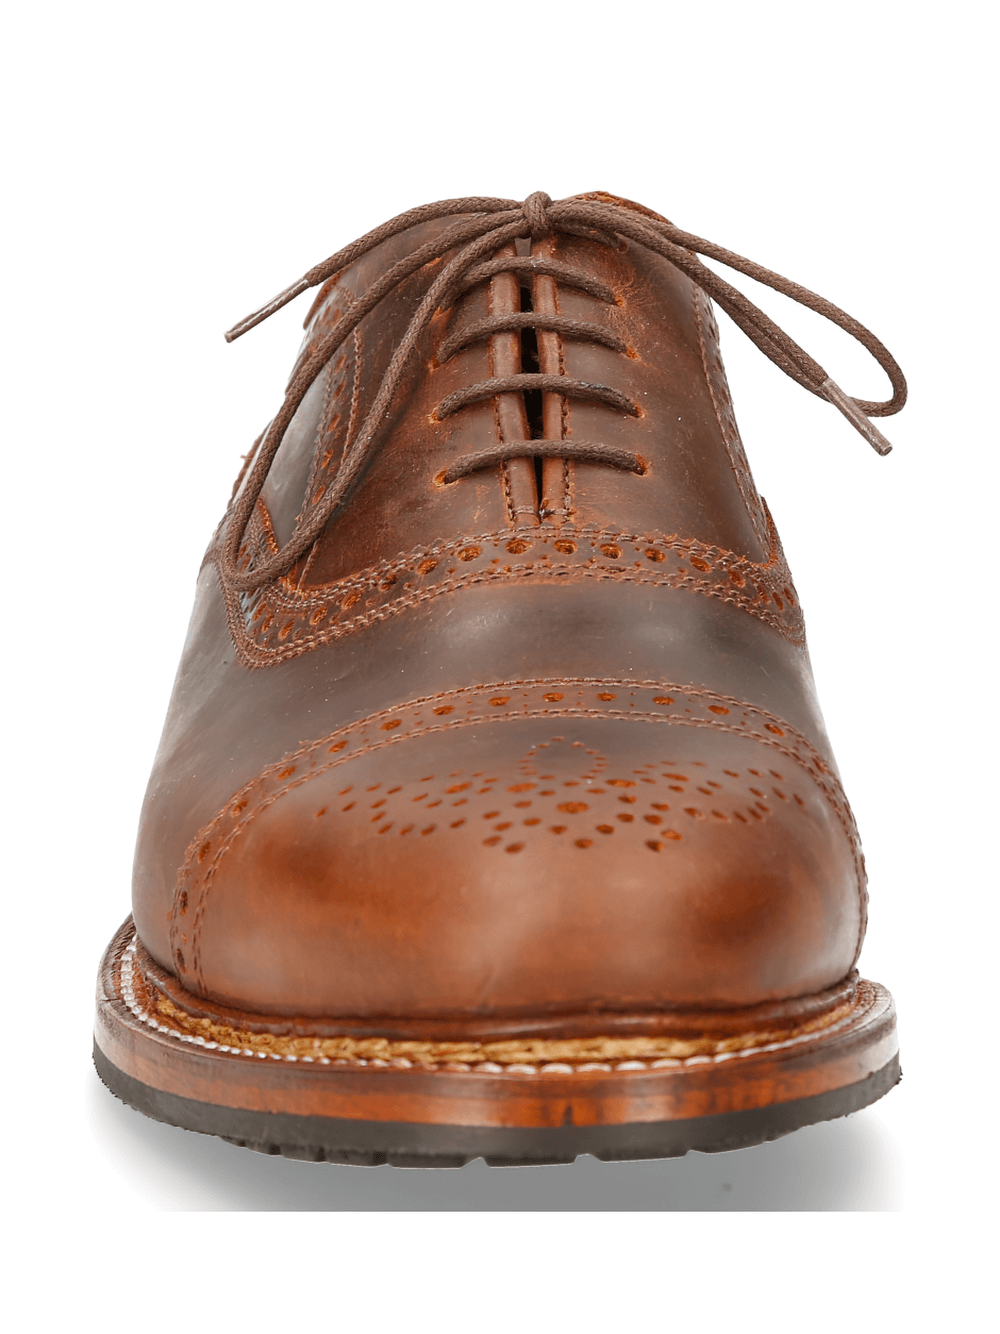 NEW ROCK Stylish Leather Tan Wingtip Lace-Up Derby Shoes